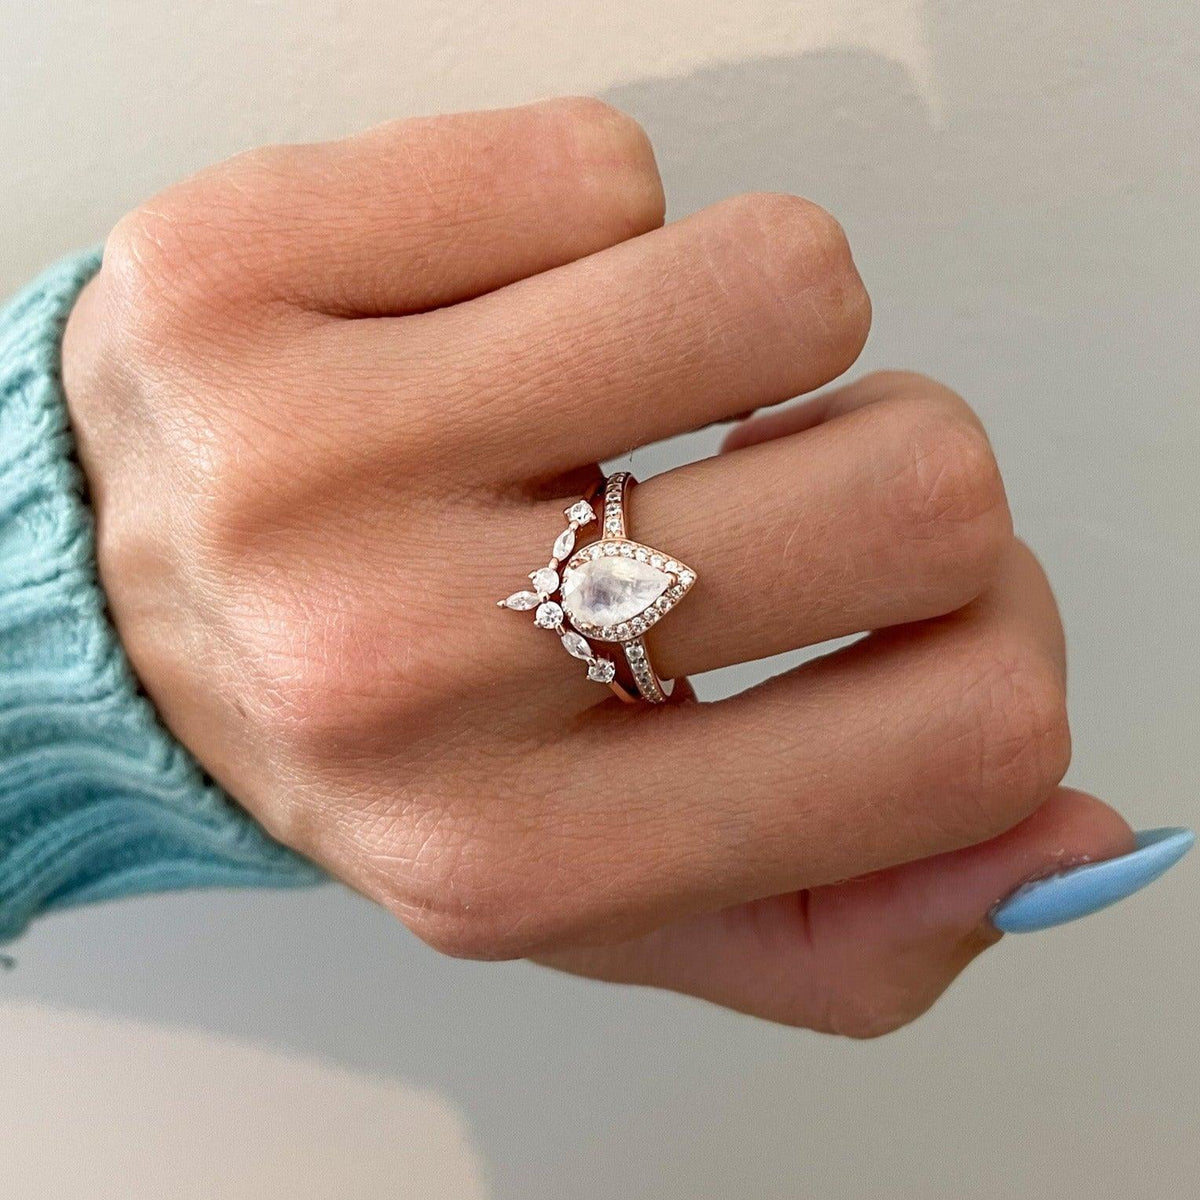 Stacked moonstone ring on woman's hand